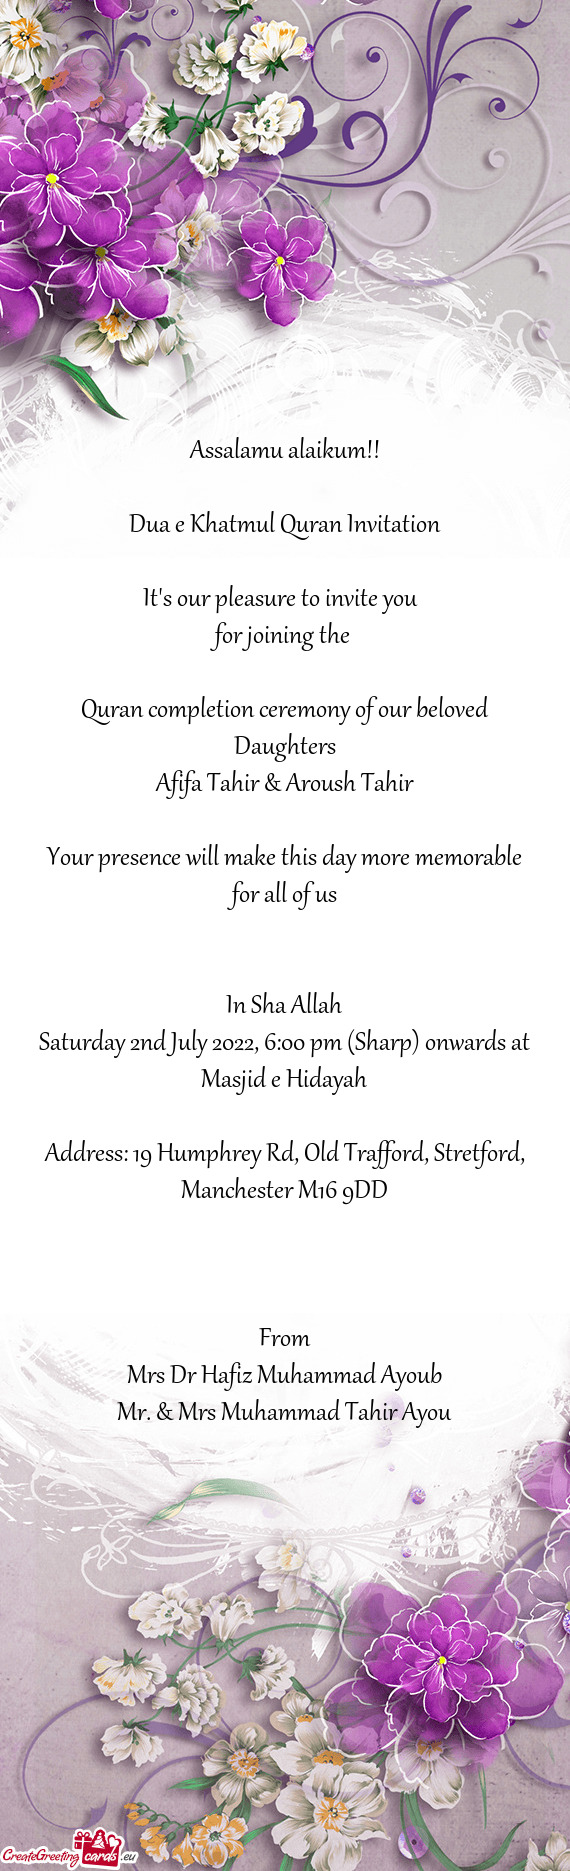 Quran completion ceremony of our beloved Daughters